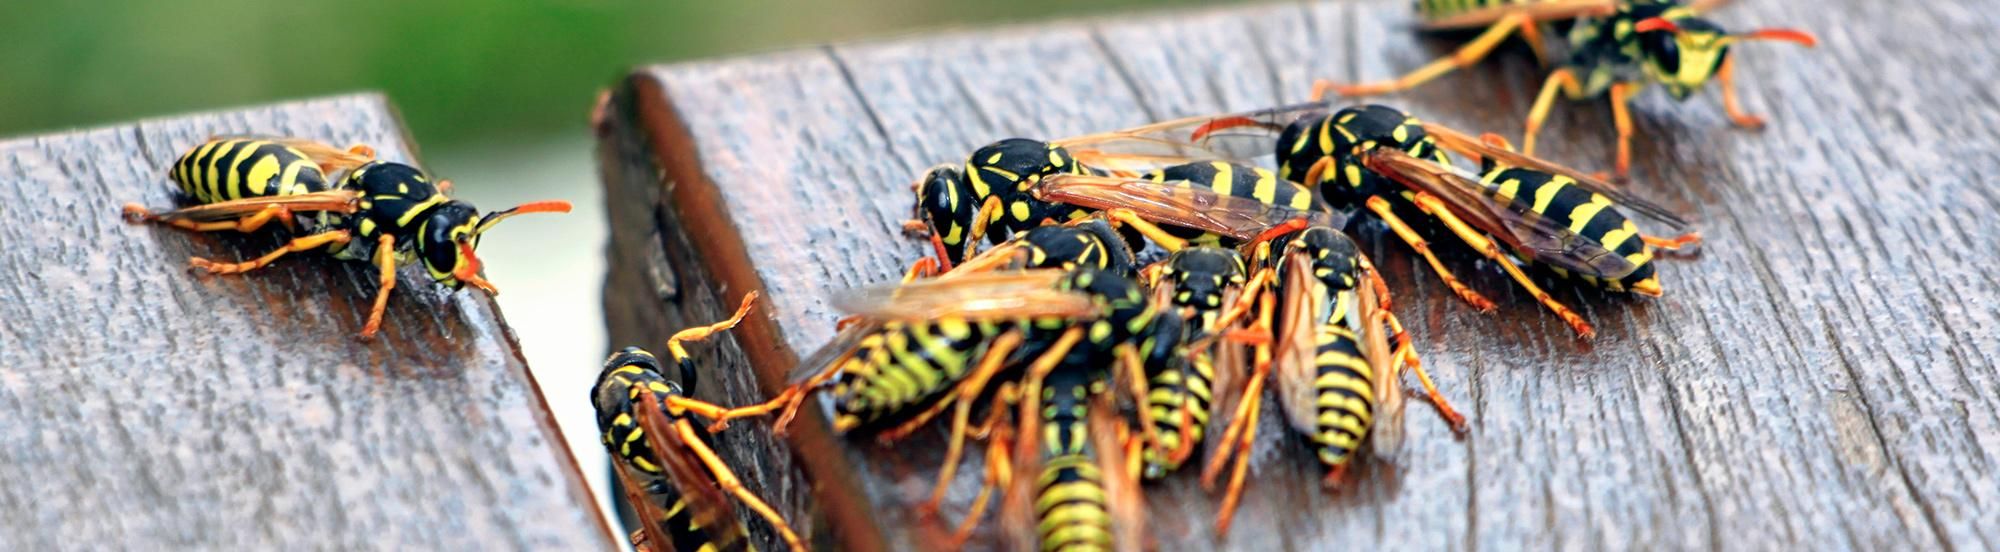 stinging yellow jackets on a picnic table